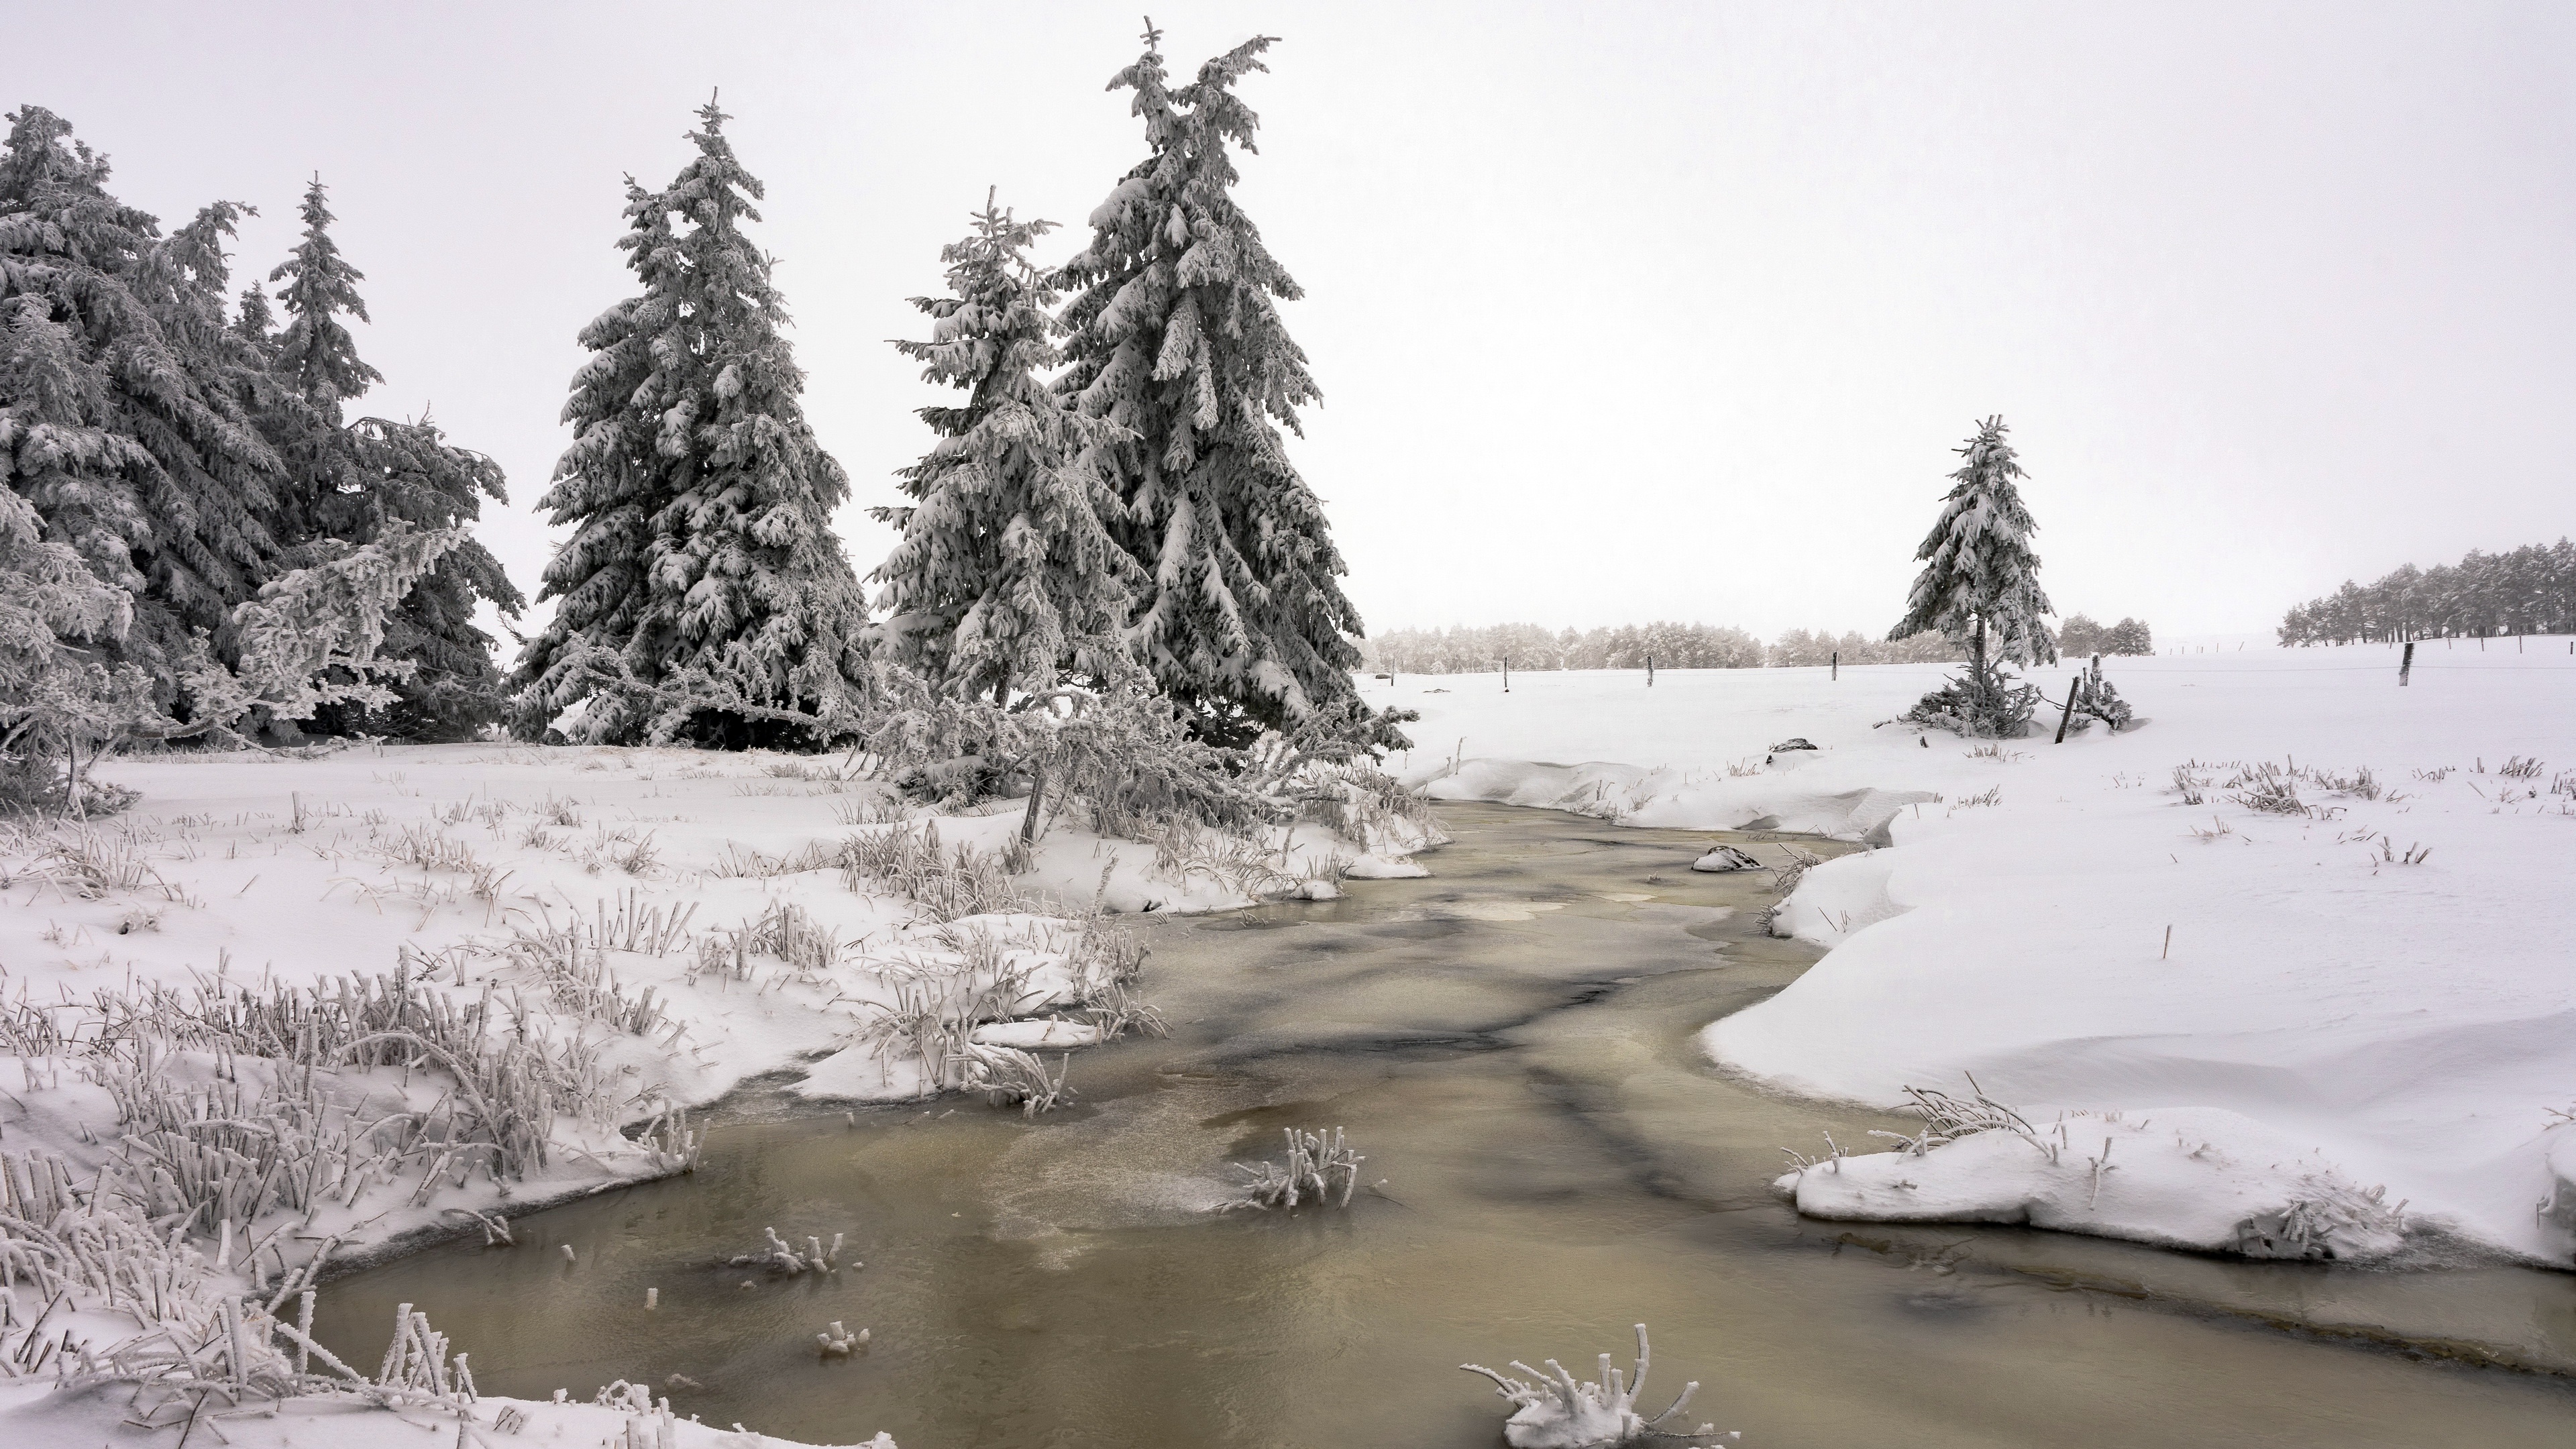 General 3840x2160 nature outdoors landscape water cold ice snow winter trees creeks